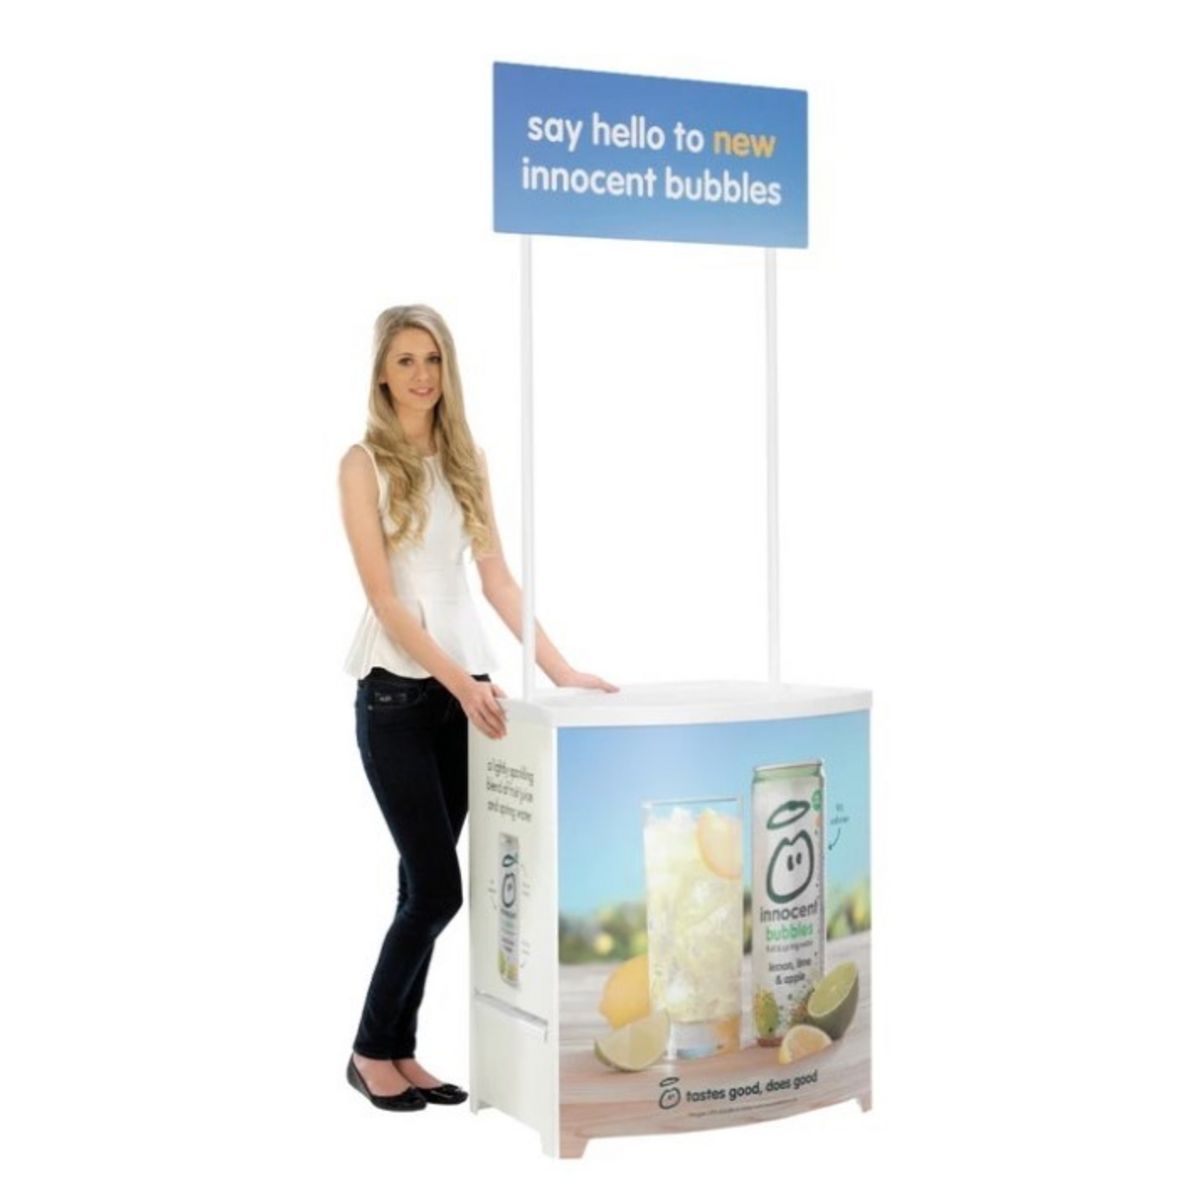 Lady standing next to completed Demo Center promotional display counter.1.jpg